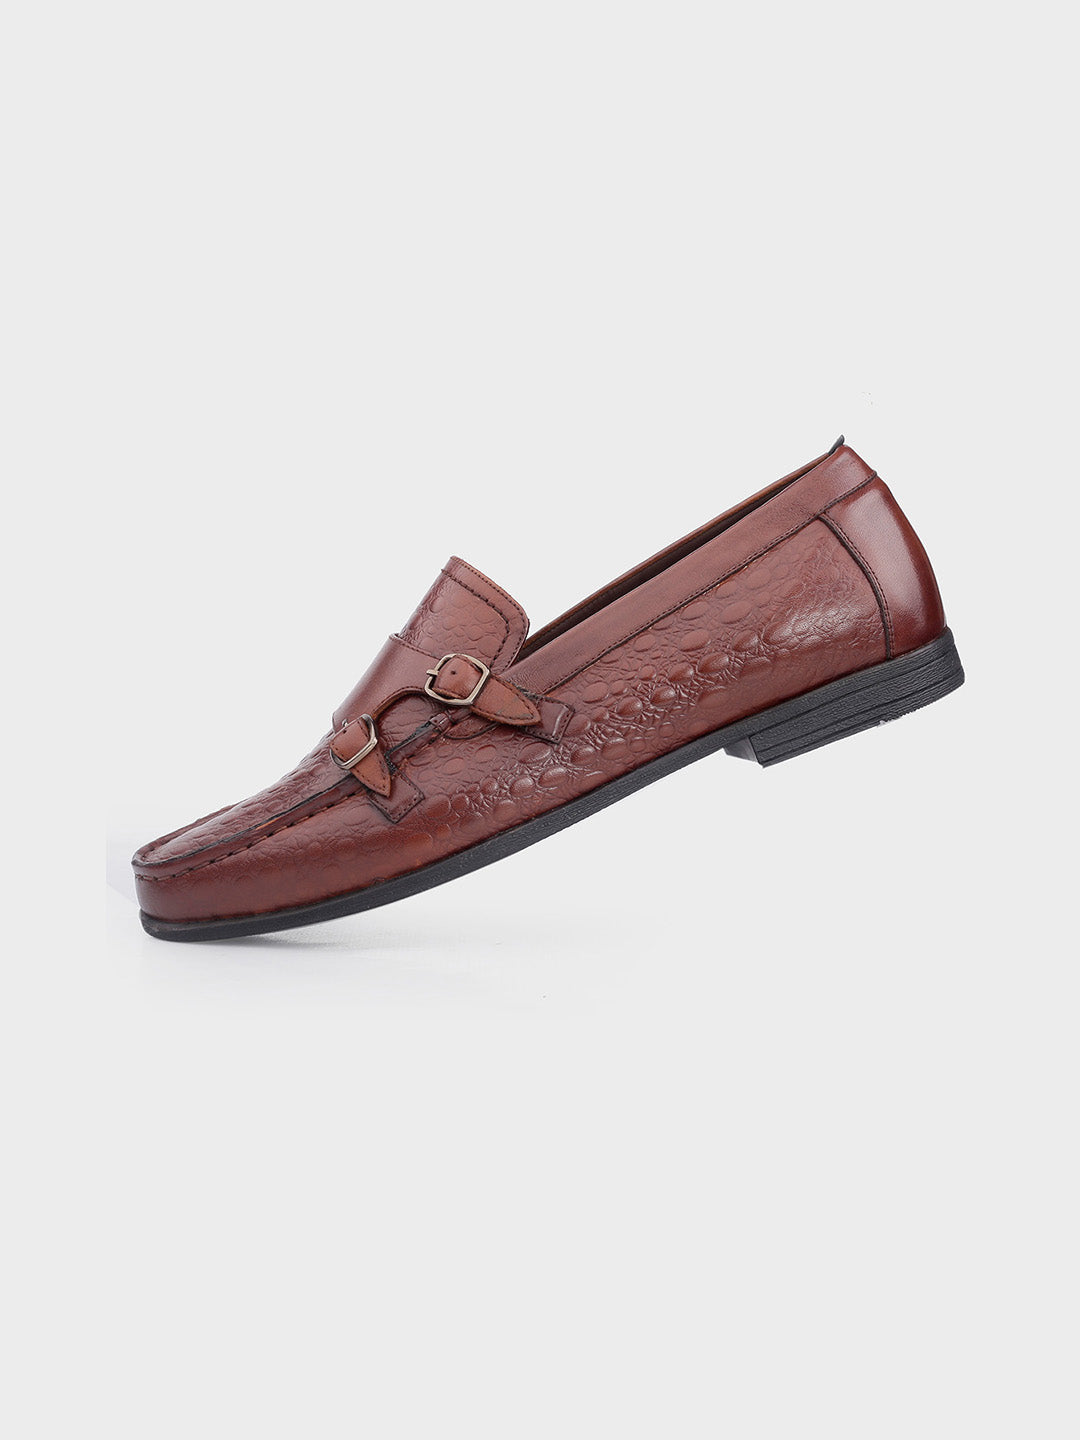 Men's Brown Leather Slip-on Monk Shoes